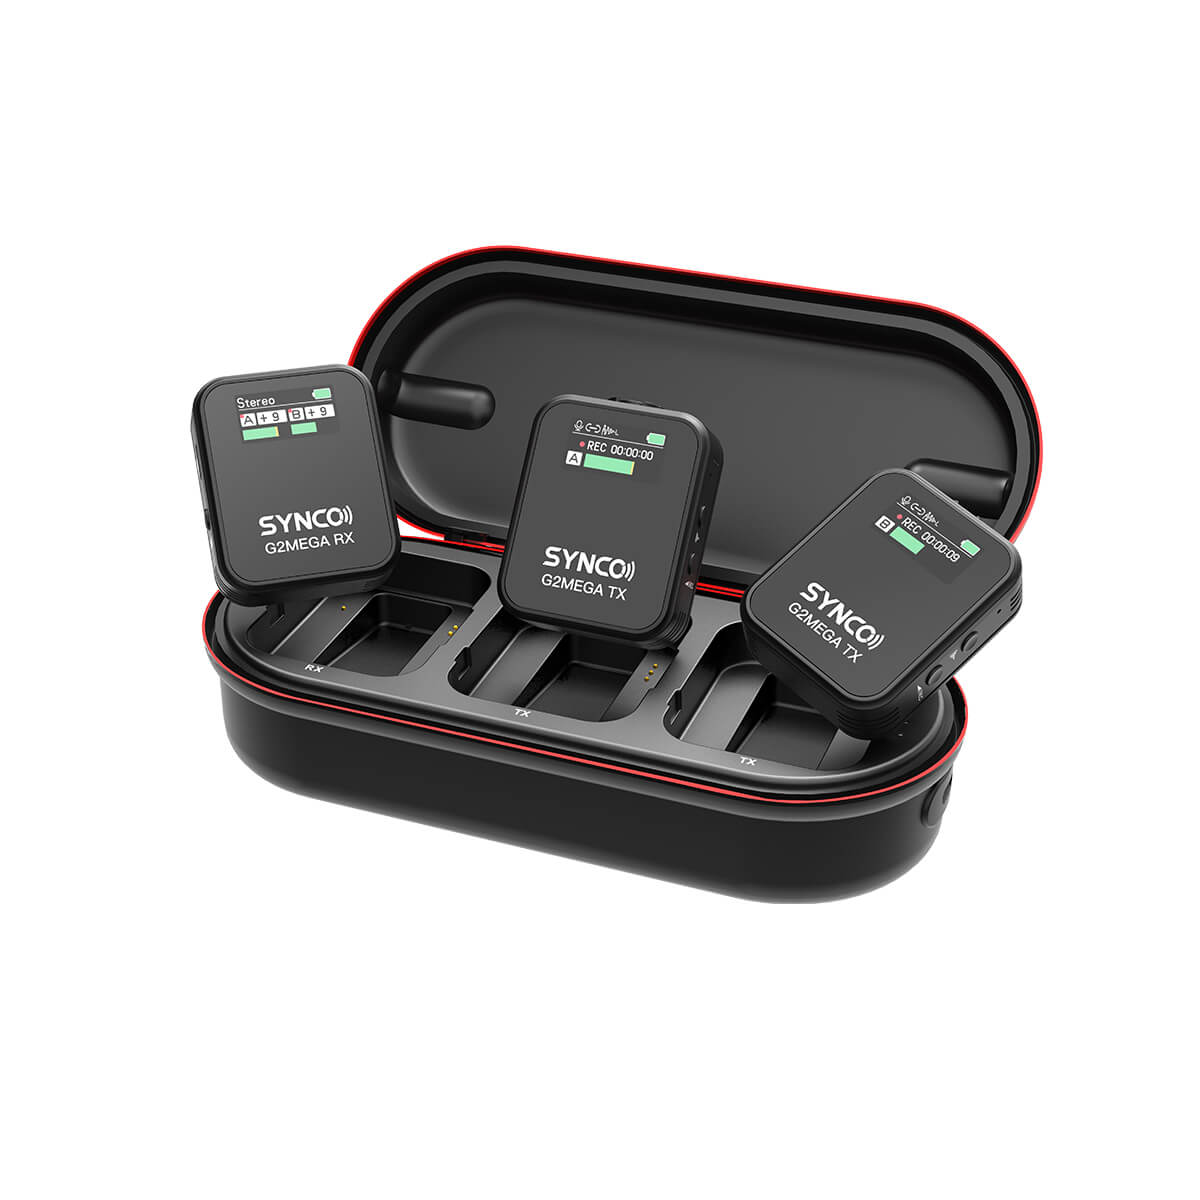 SYNCO G2 Mega includes two transmitters, a receiver, and a charging case.